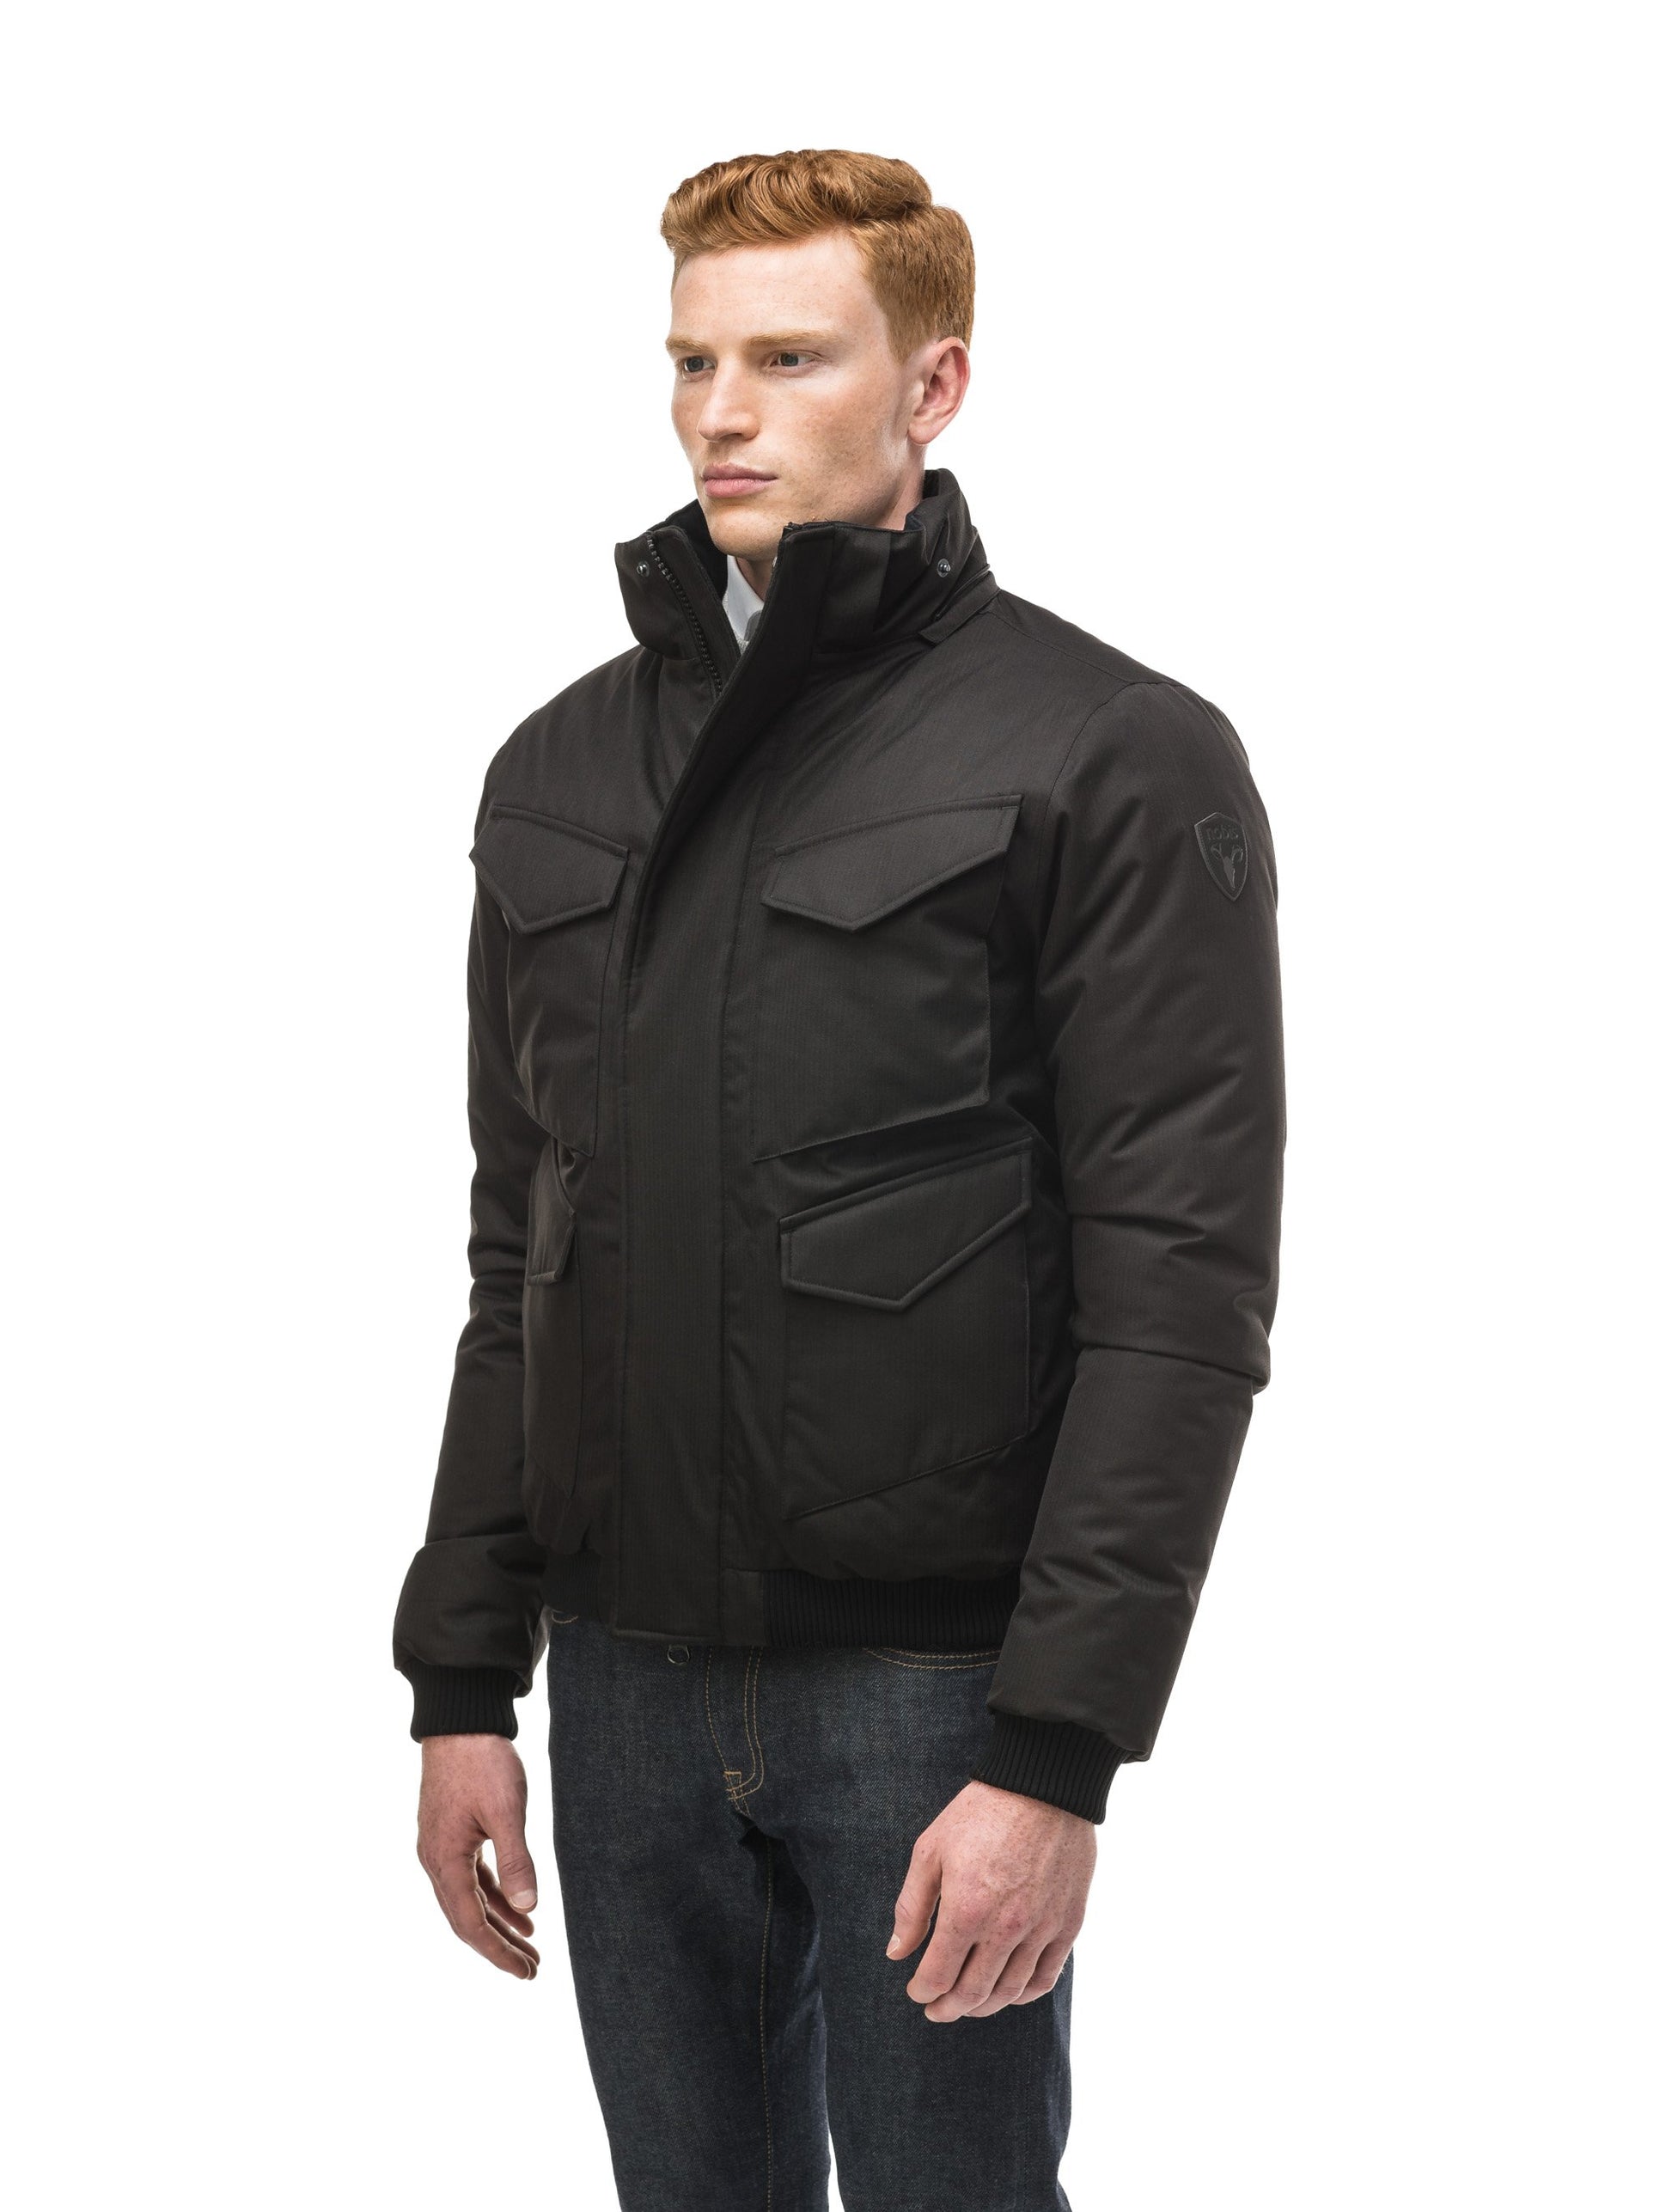 Men's waist length bomber with four huge pockets on the front in Black